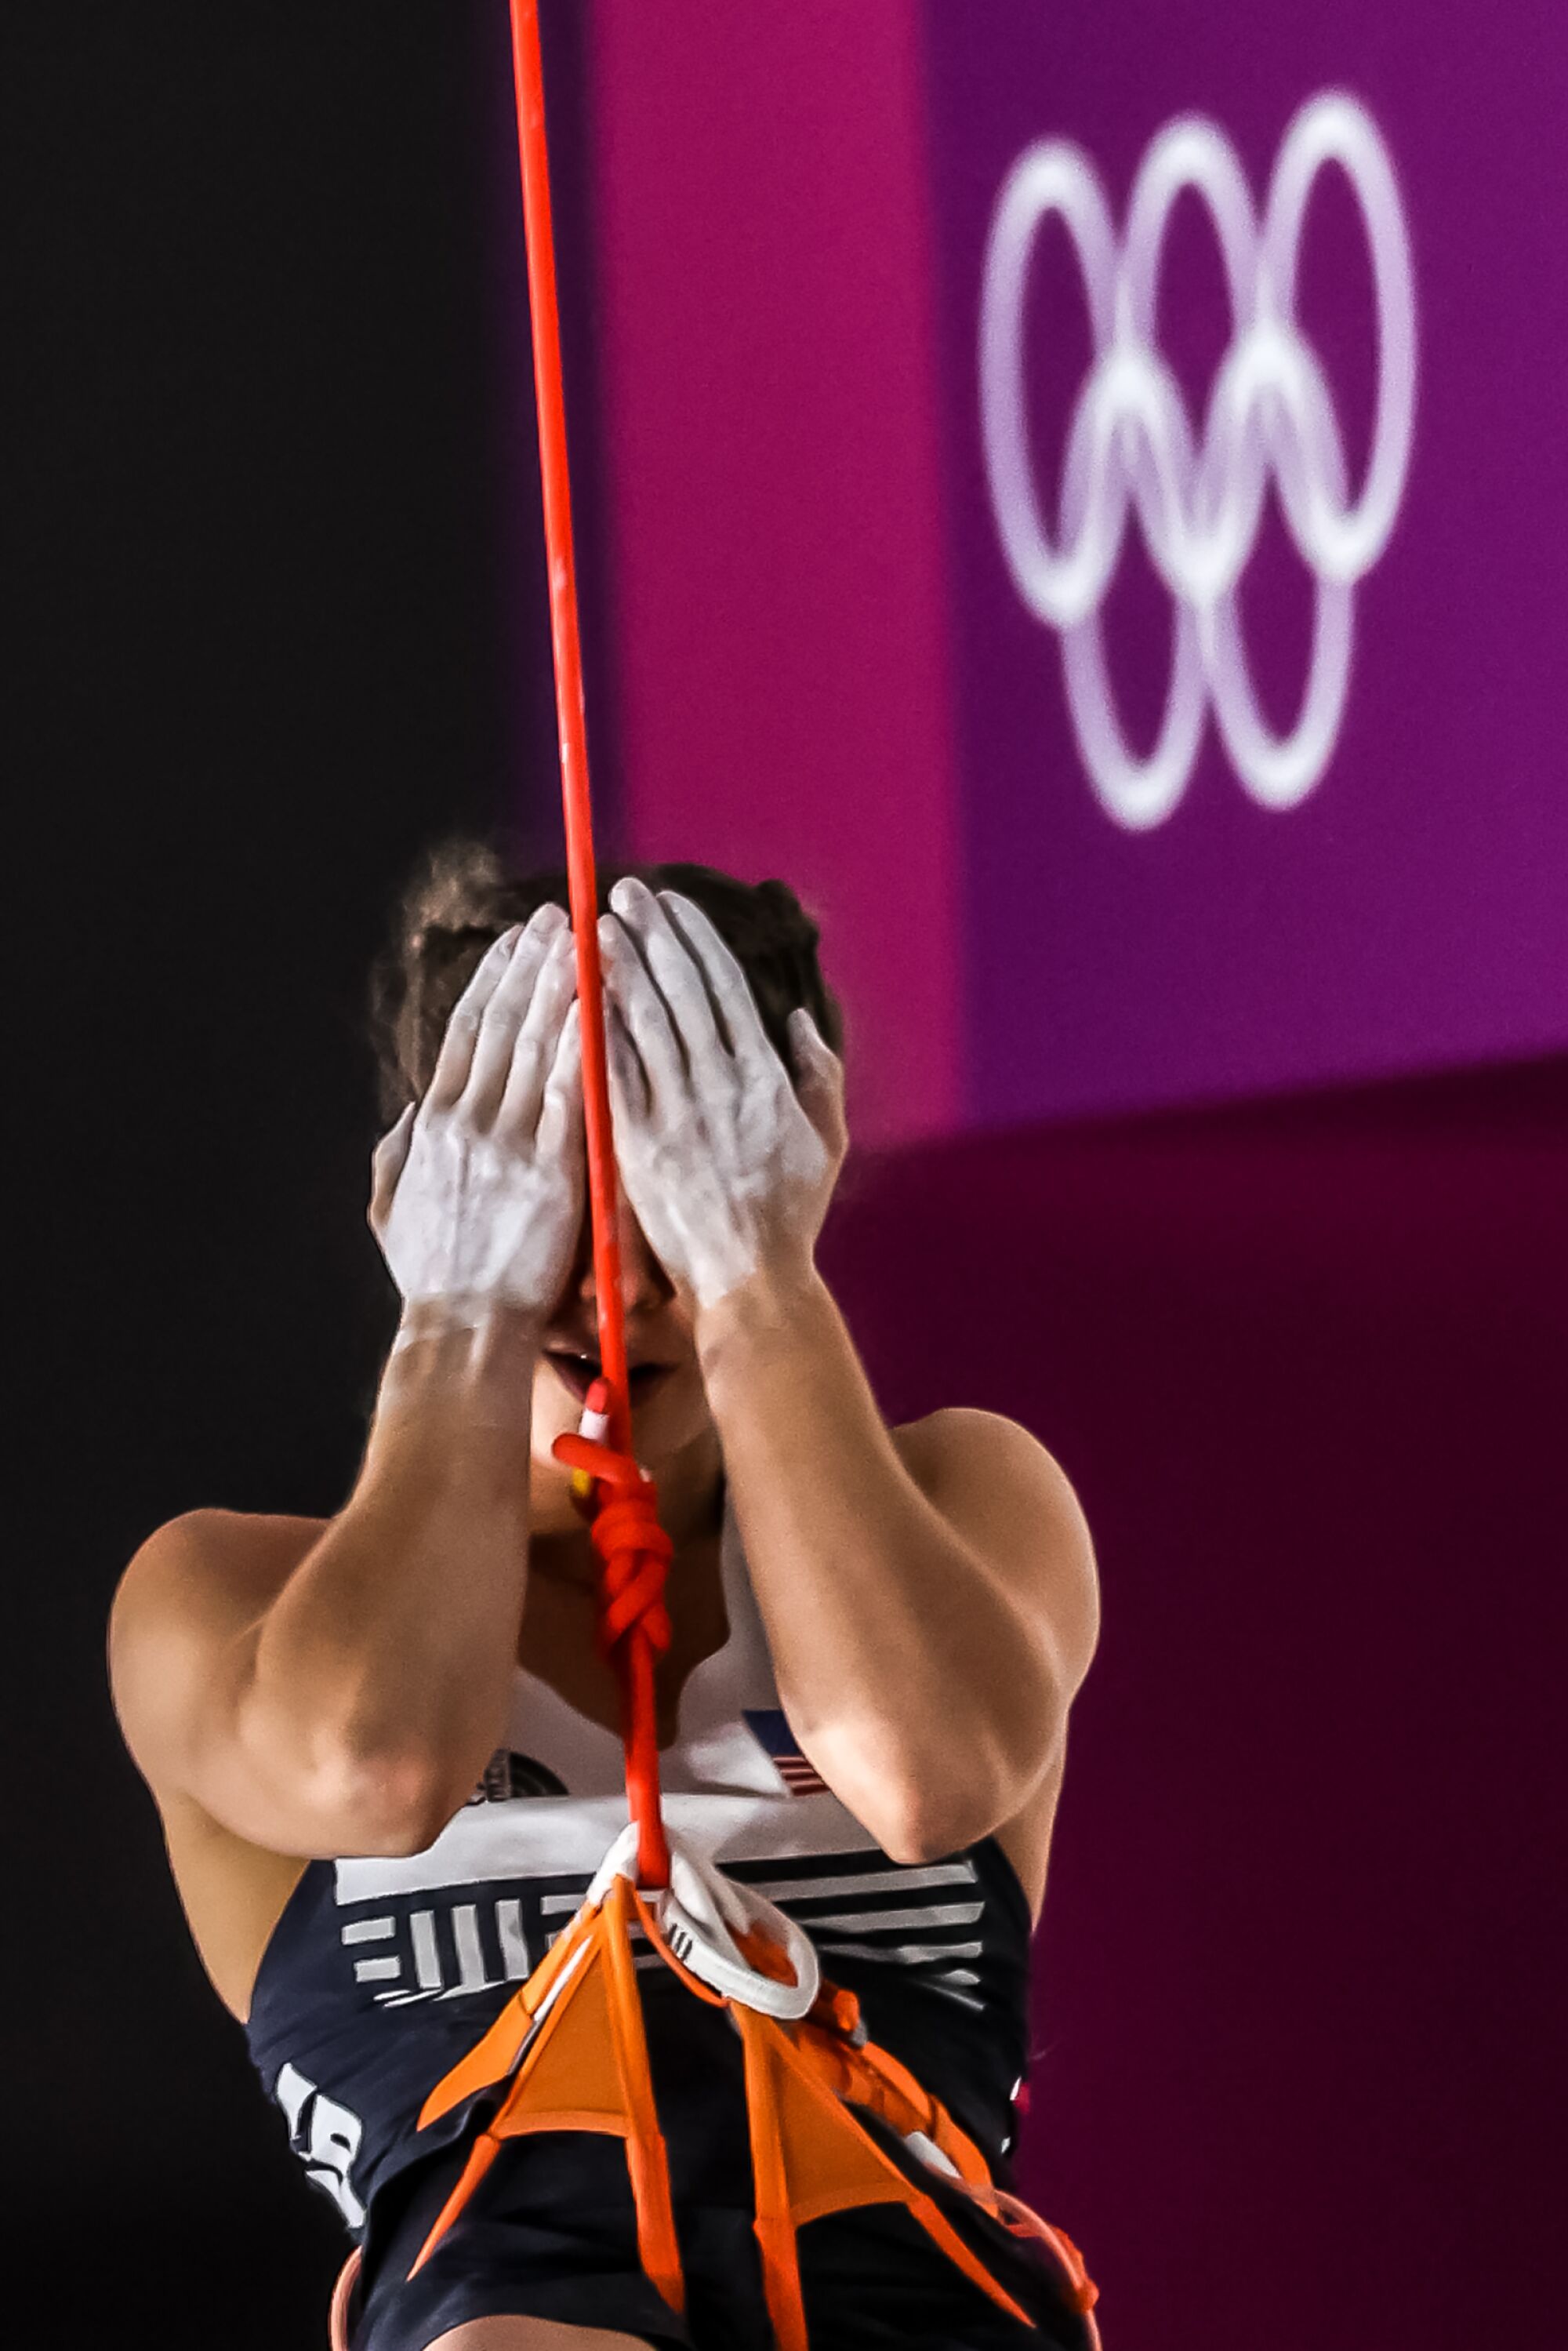 USA climber Brooke Raboutou covers her face as she descends from the lead wall